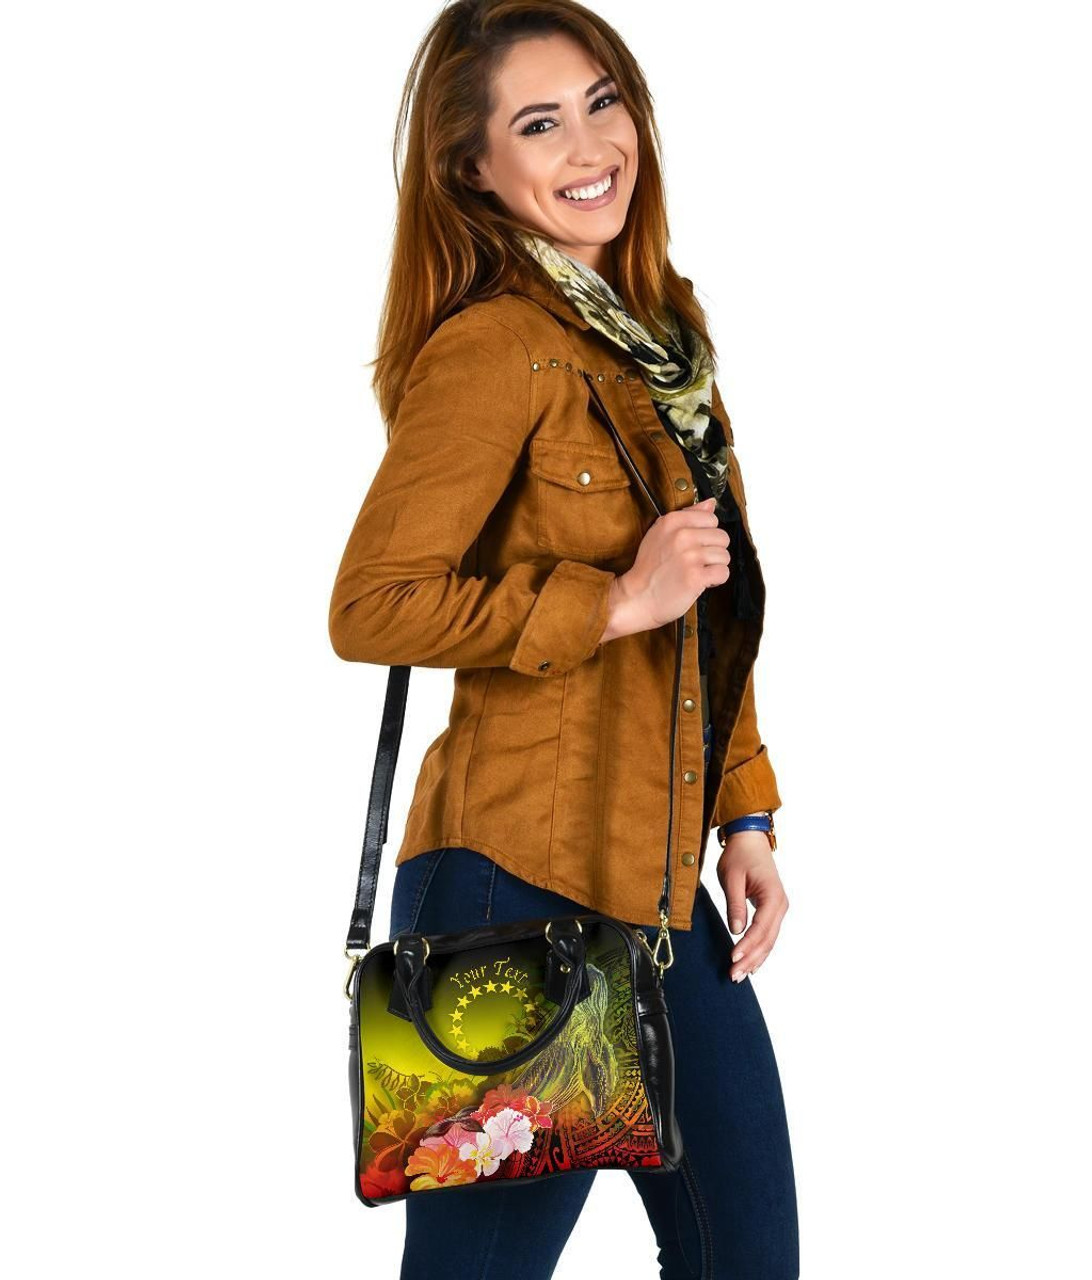 Cook Islands Custom Personalised Shoulder Handbags - Humpback Whale With Tropical Flowers (Yellow) 5